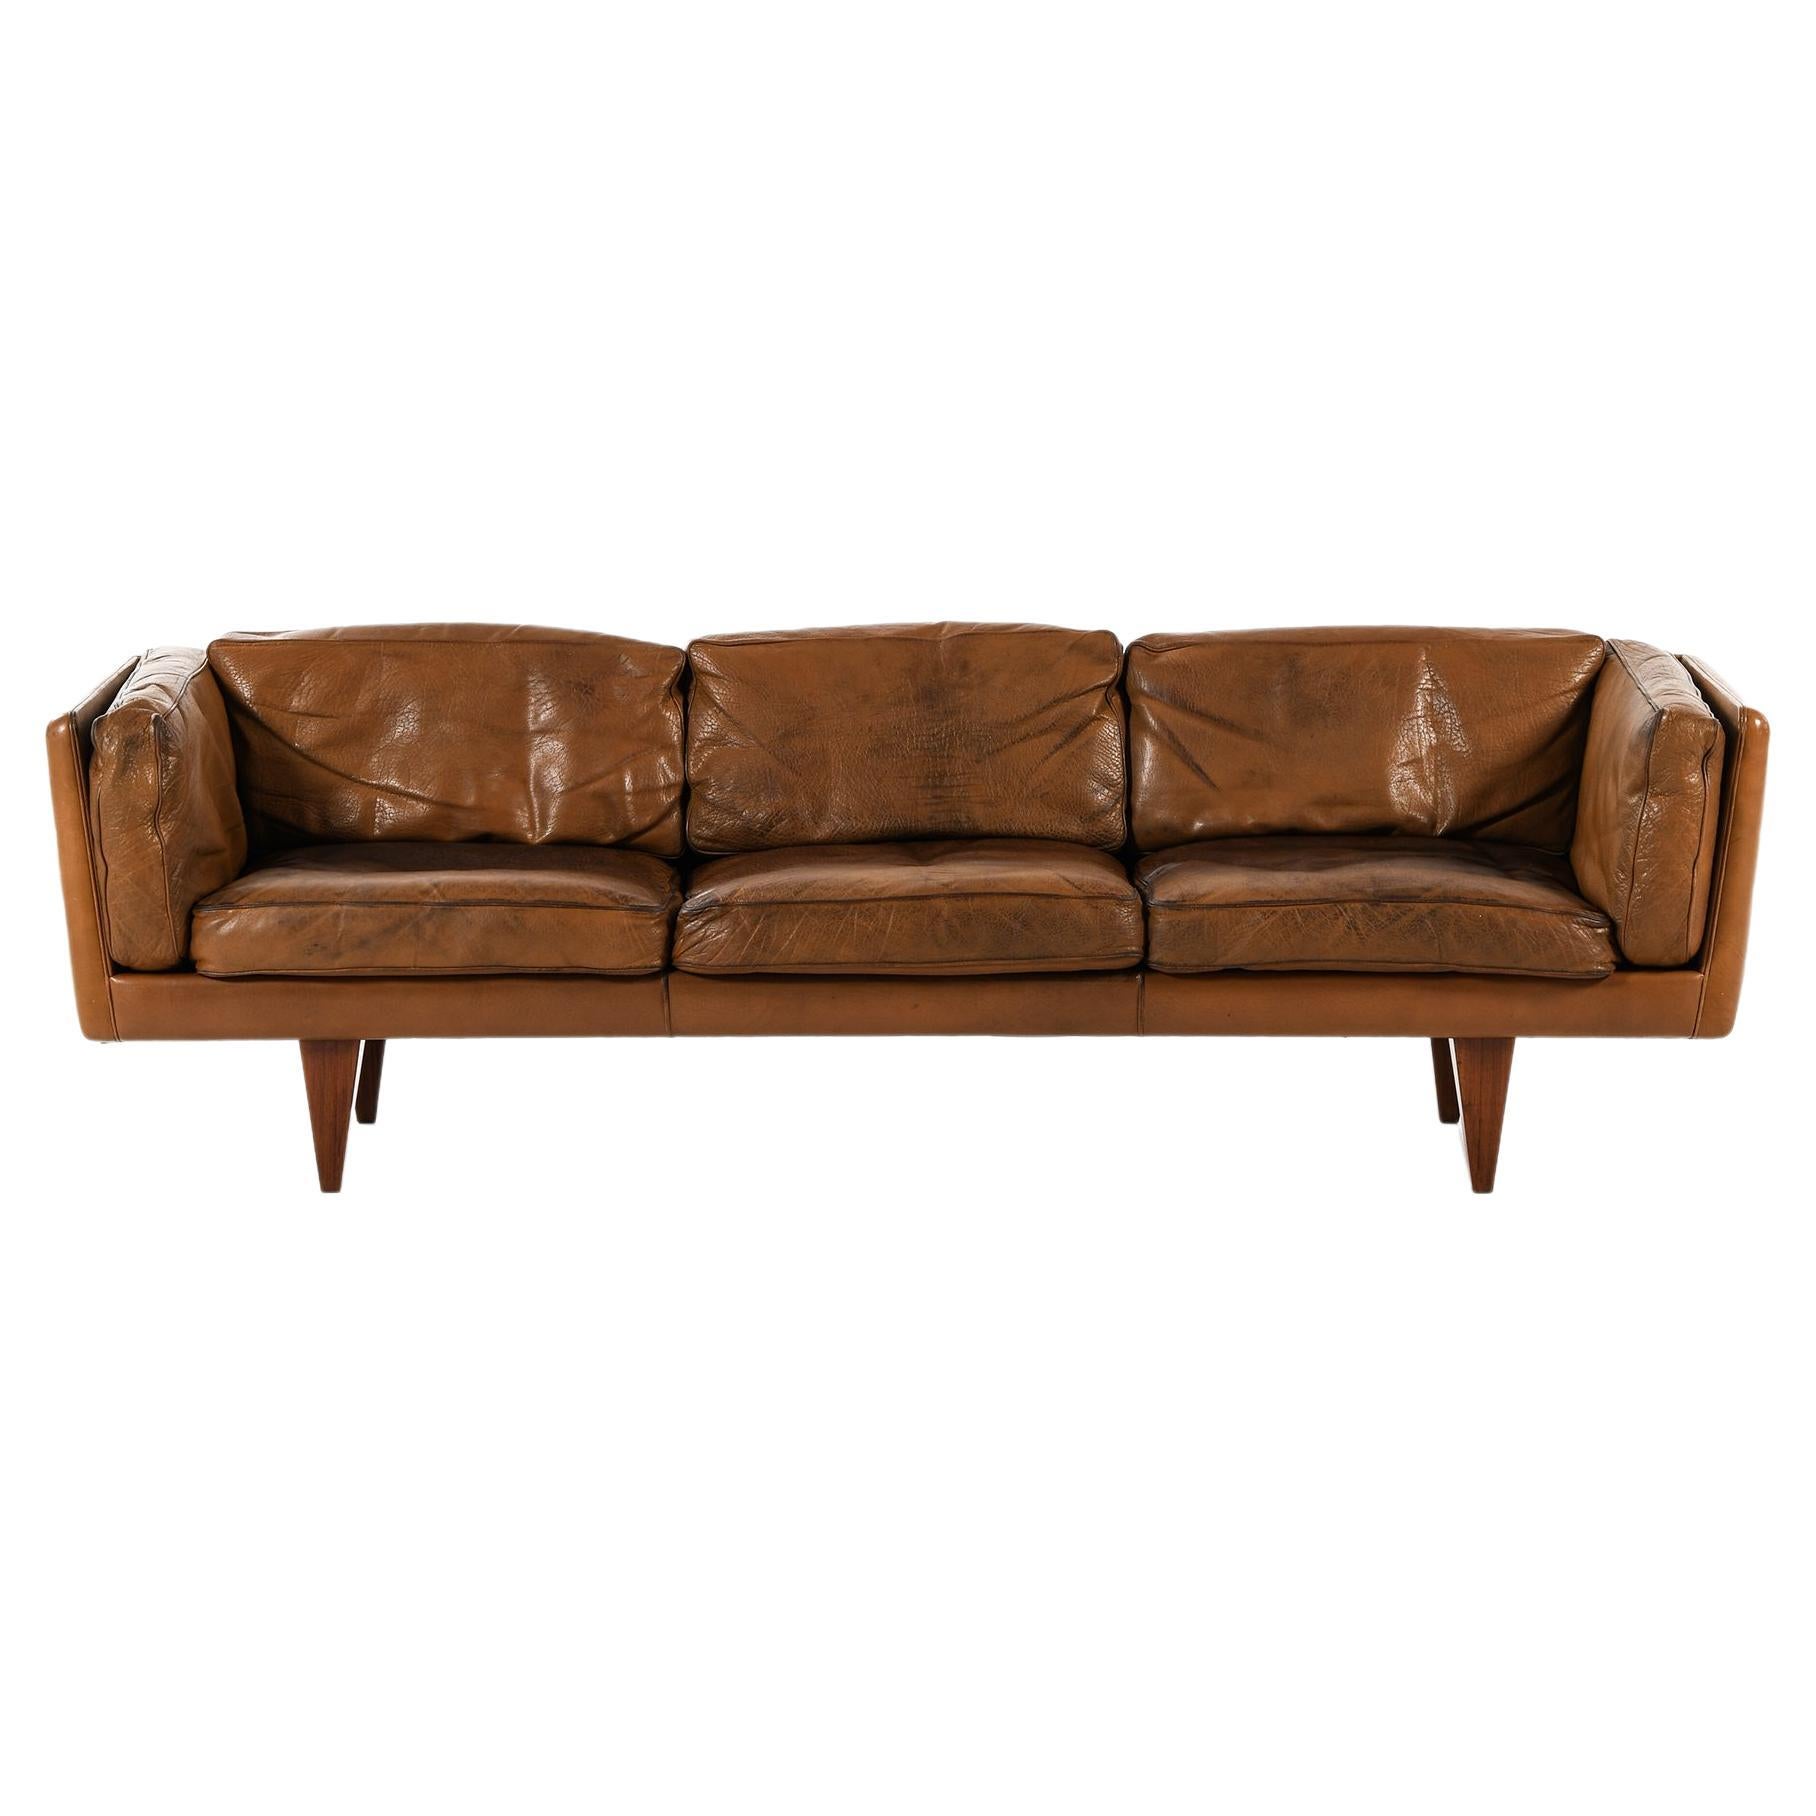 Sofa in Rosewood and Original Brown Leather by Illum Wikkelsø, 1960's For Sale